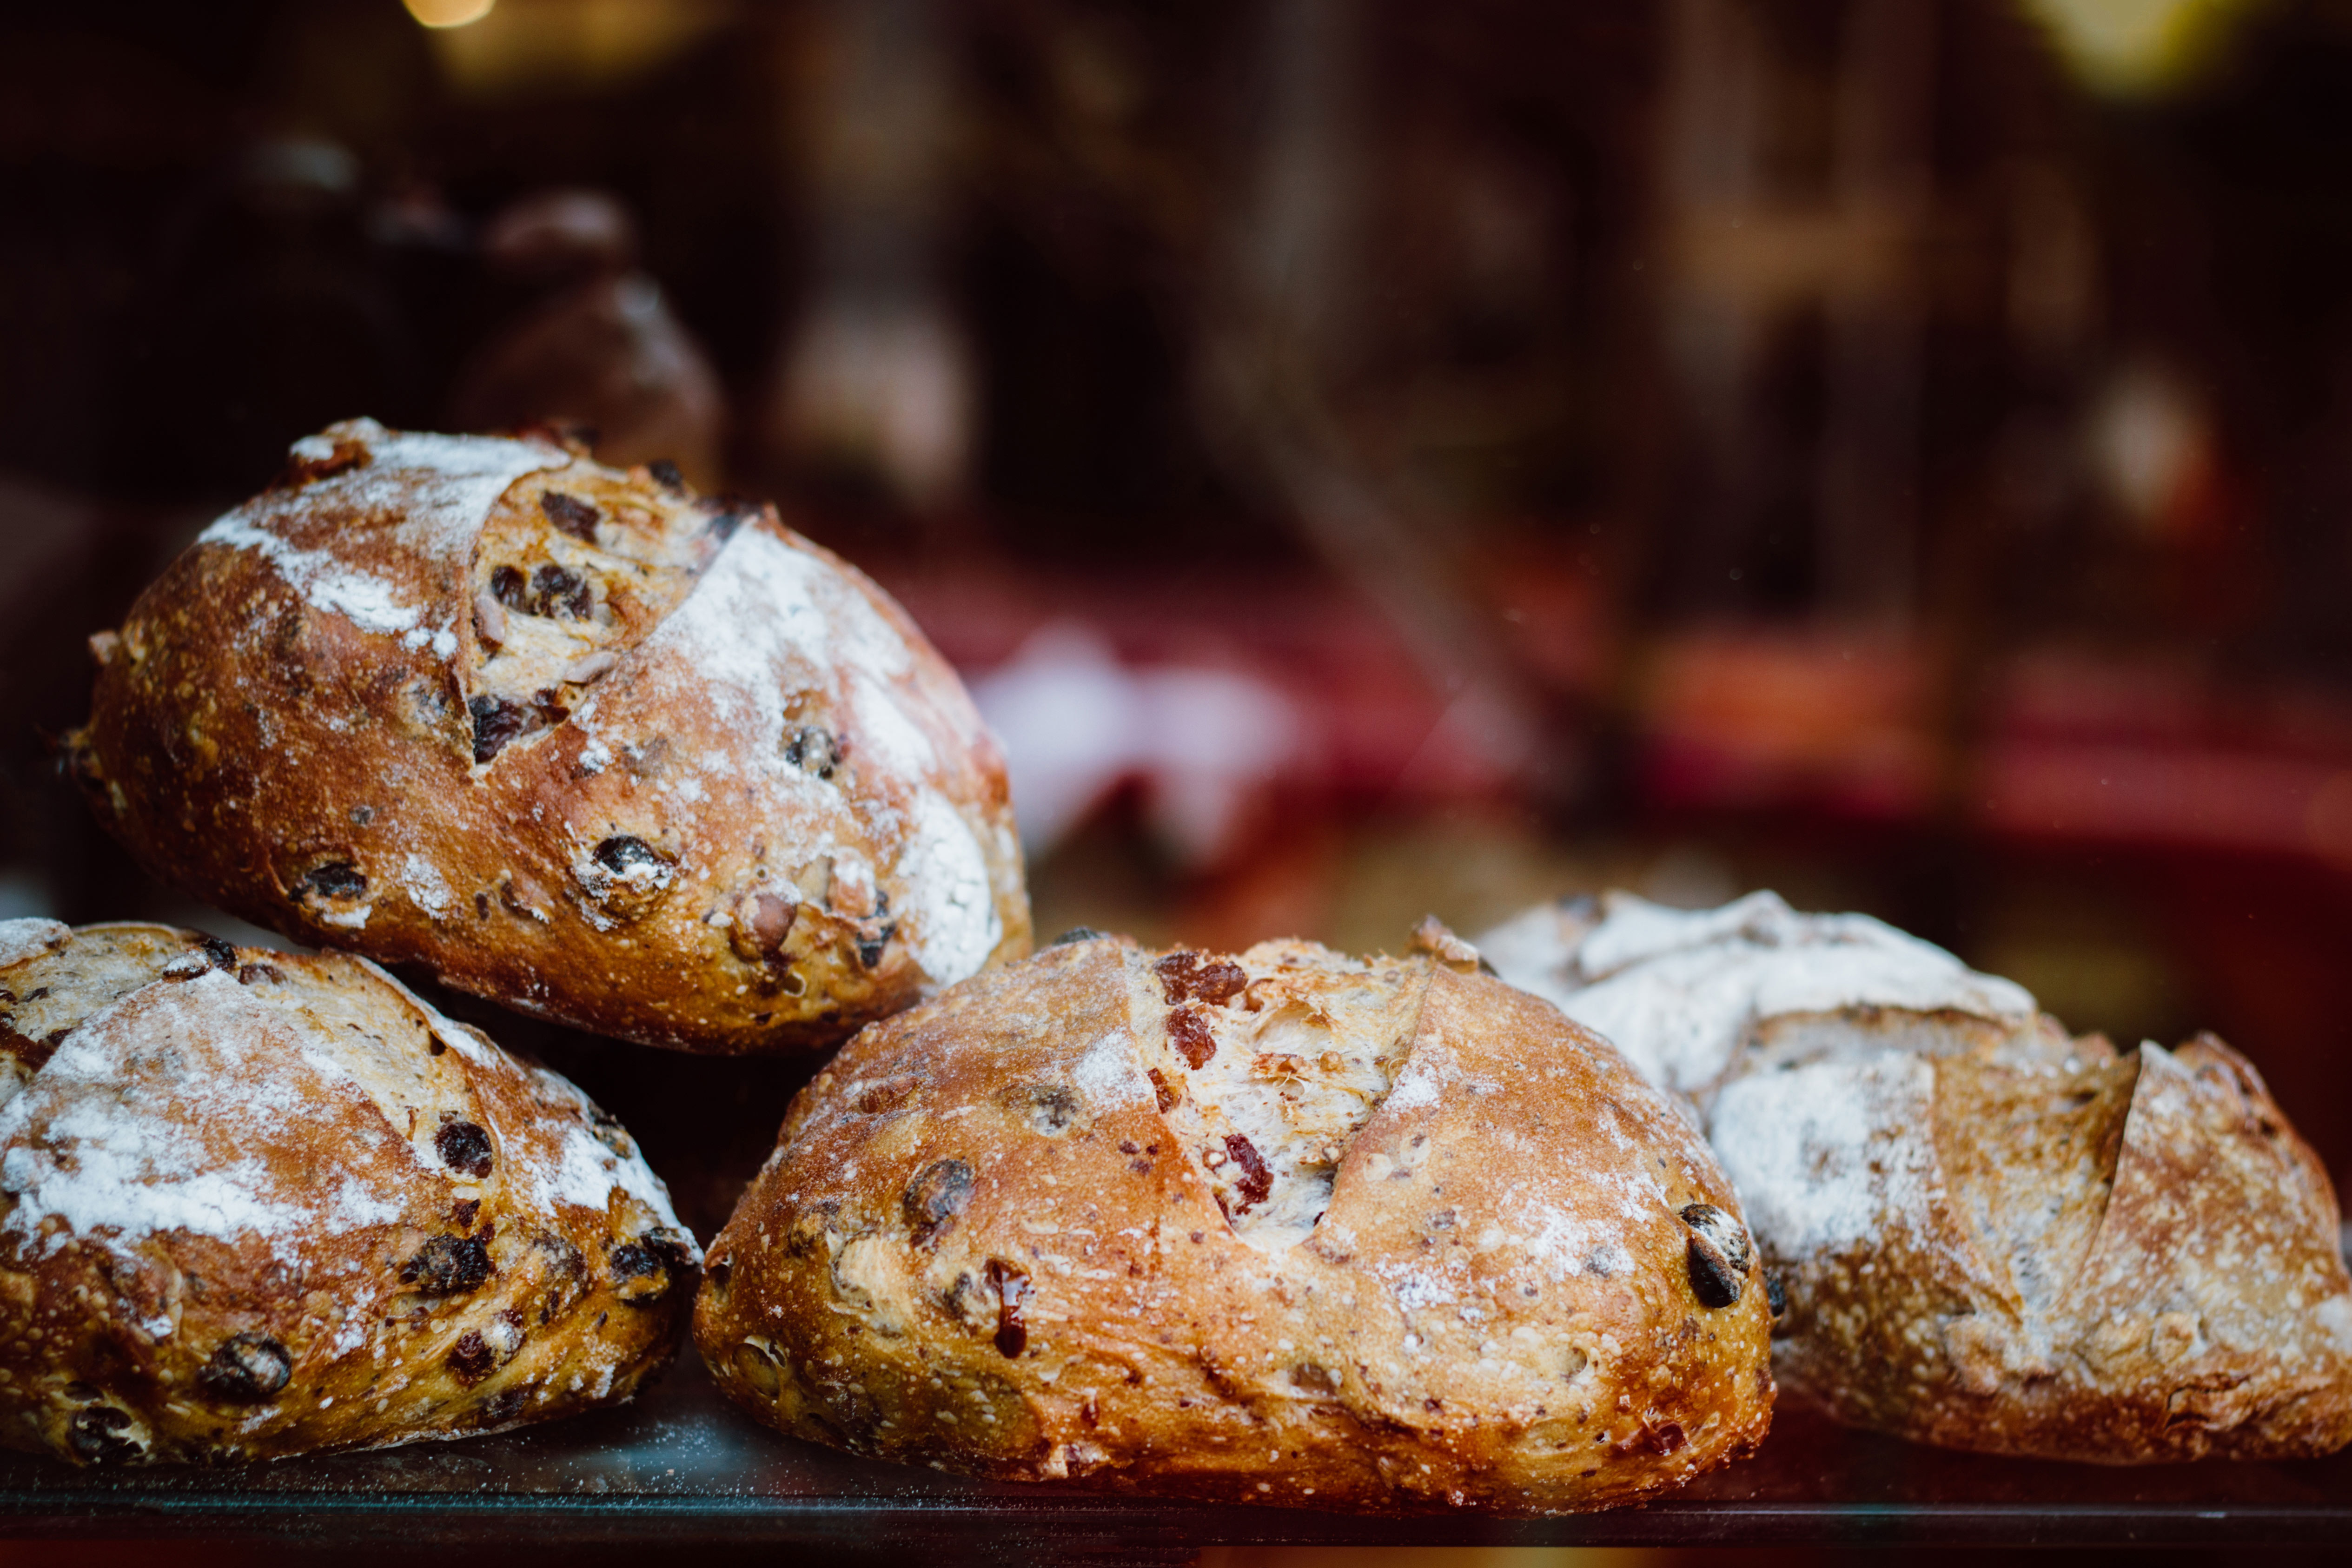 Bread for sale at a bakery. Image by Gabriela Tulian / Getty